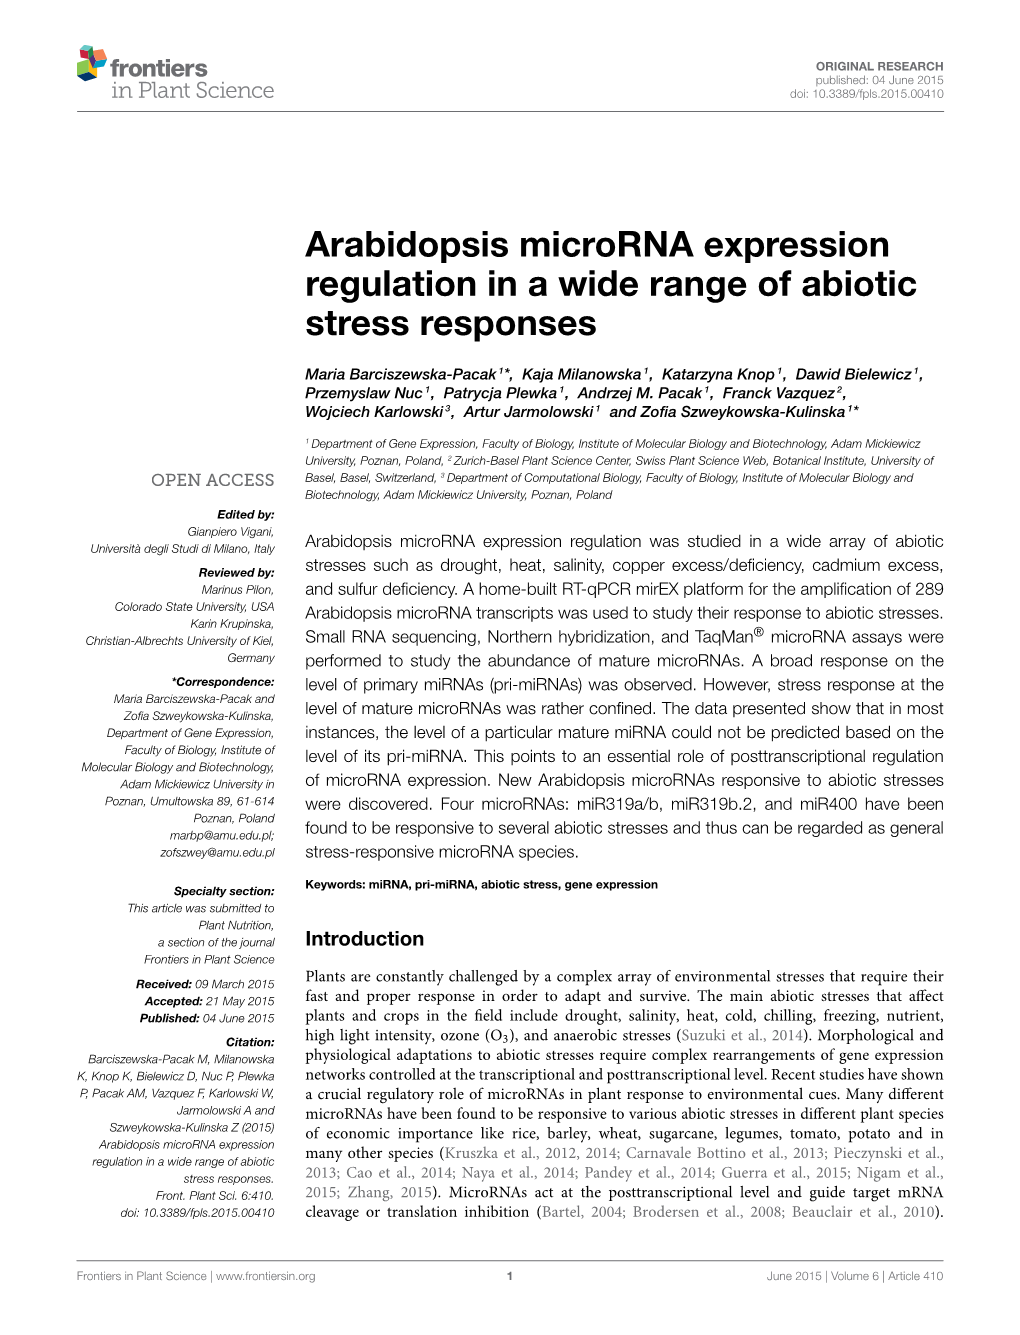 Arabidopsis Microrna Expression Regulation in a Wide Range of Abiotic Stress Responses